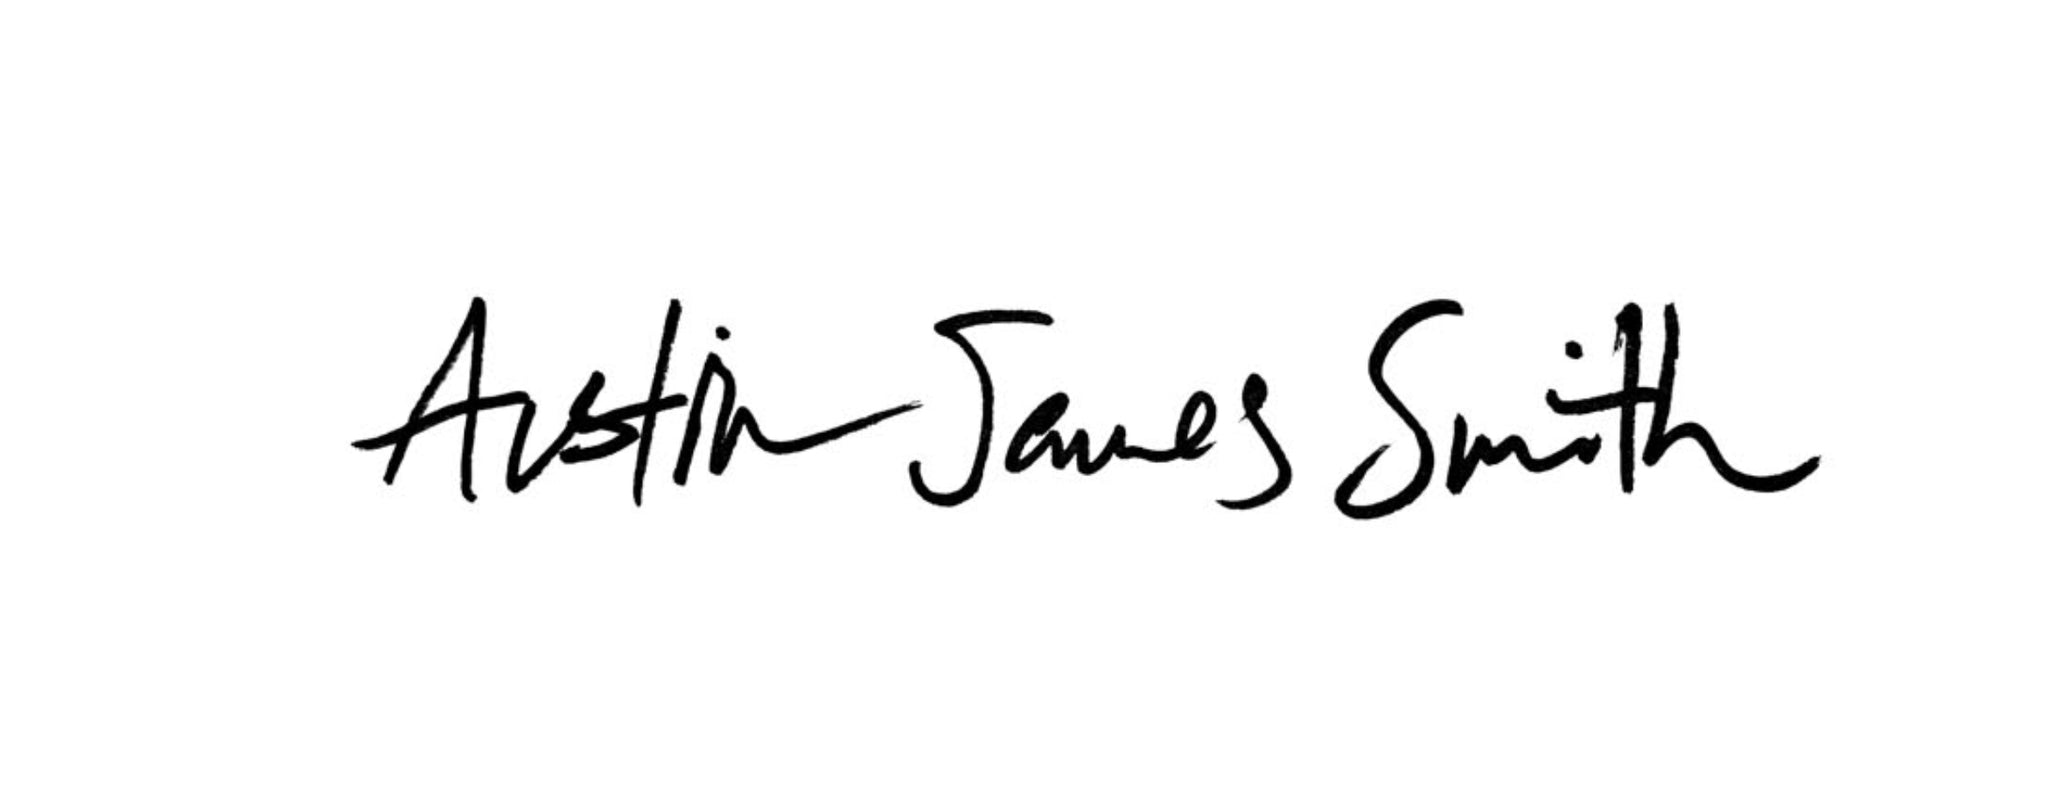 Austin james Smith Jewelry Gift cards available for site wide use